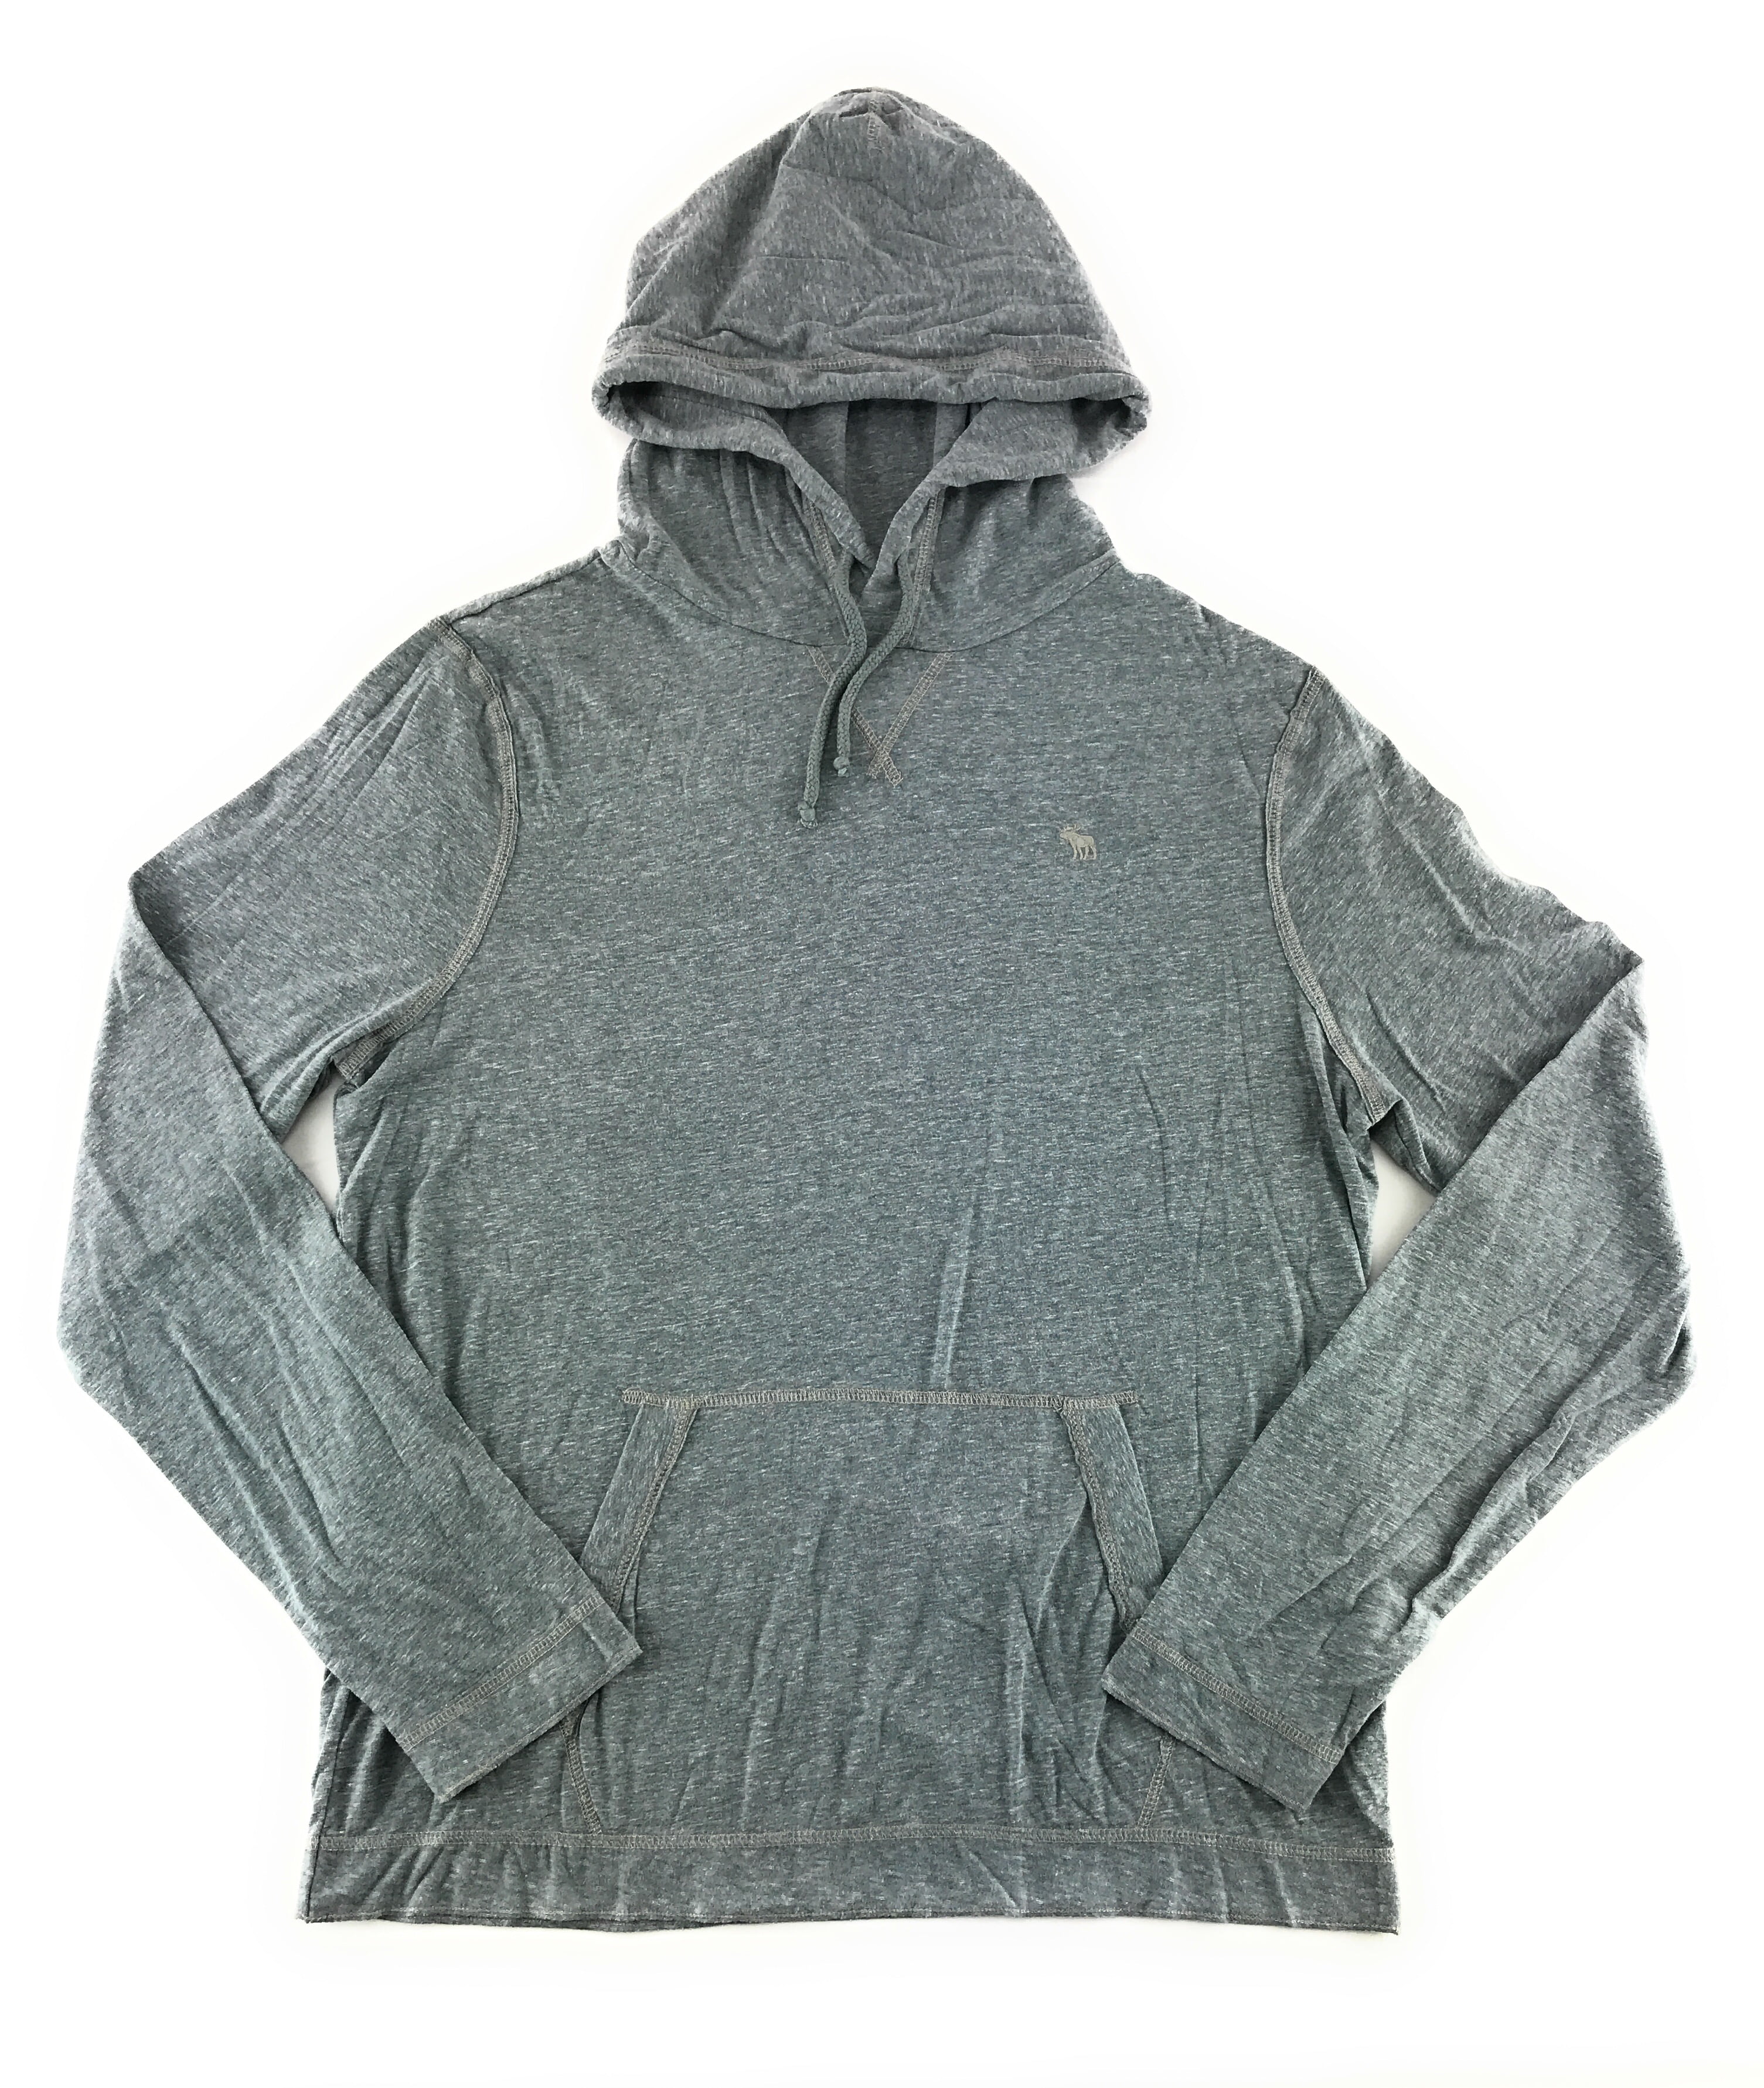 Abercrombie & Fitch Mens Hooded -